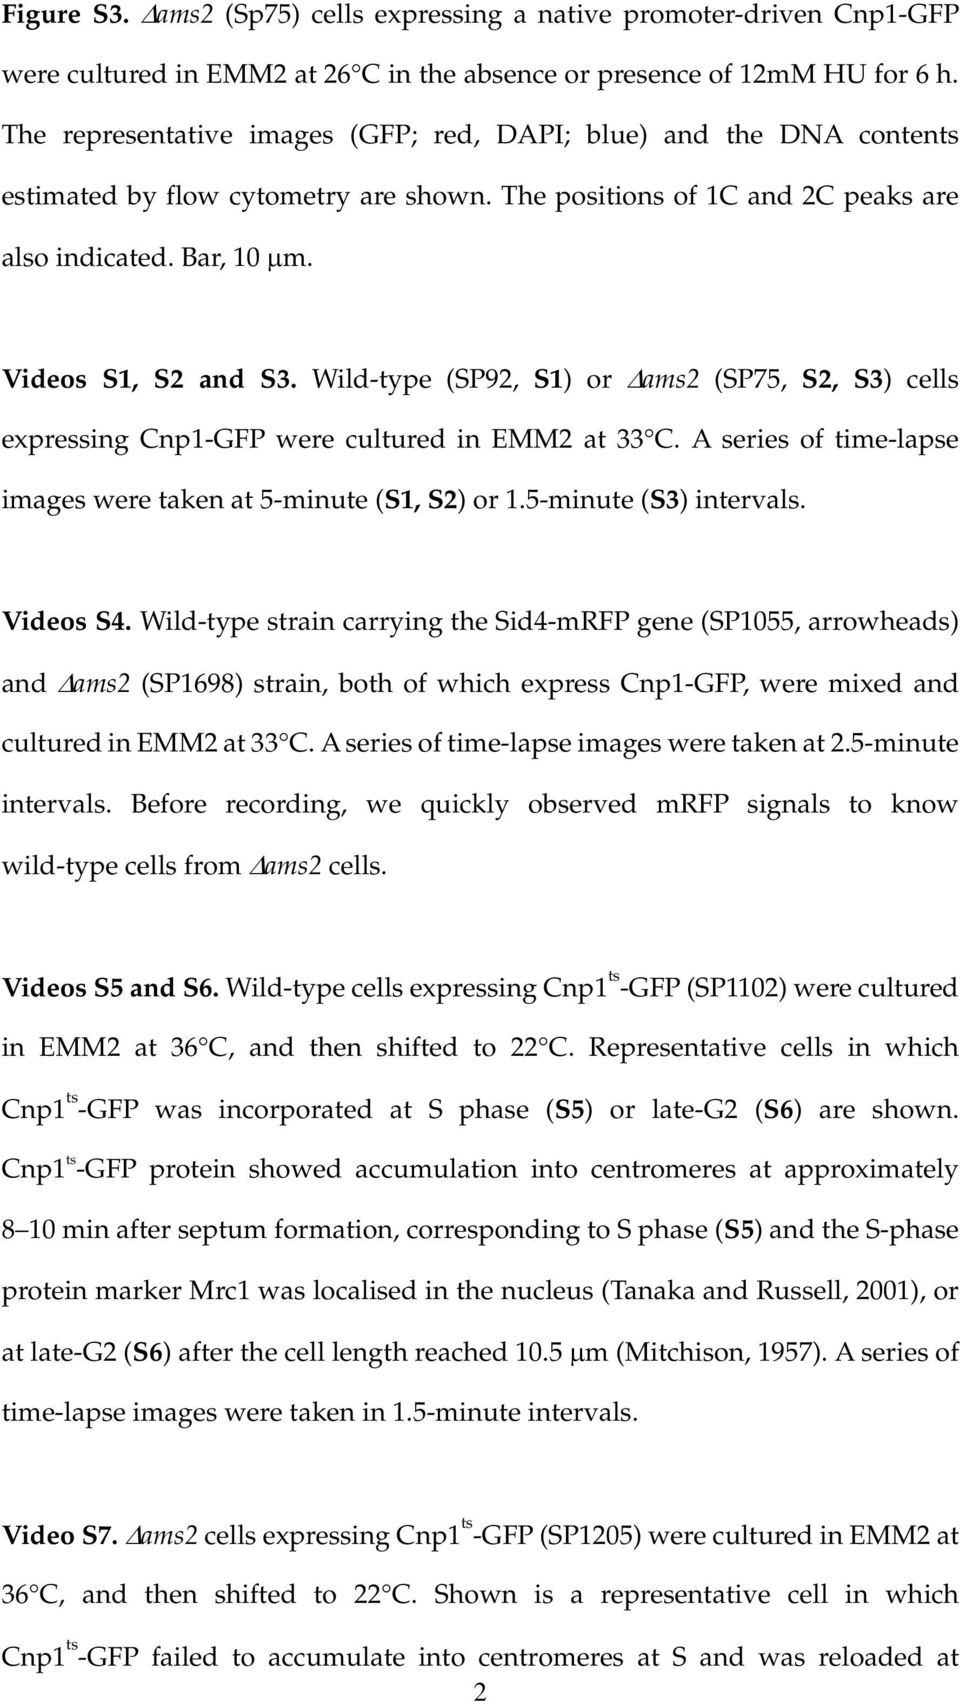 Wild-type (SP92, S1) or Δams2 (SP75, S2, S3) cells expressing Cnp1-GFP were cultured in EMM2 at 33 C. A series of time-lapse images were taken at 5-minute (S1, S2) or 1.5-minute (S3) intervals.